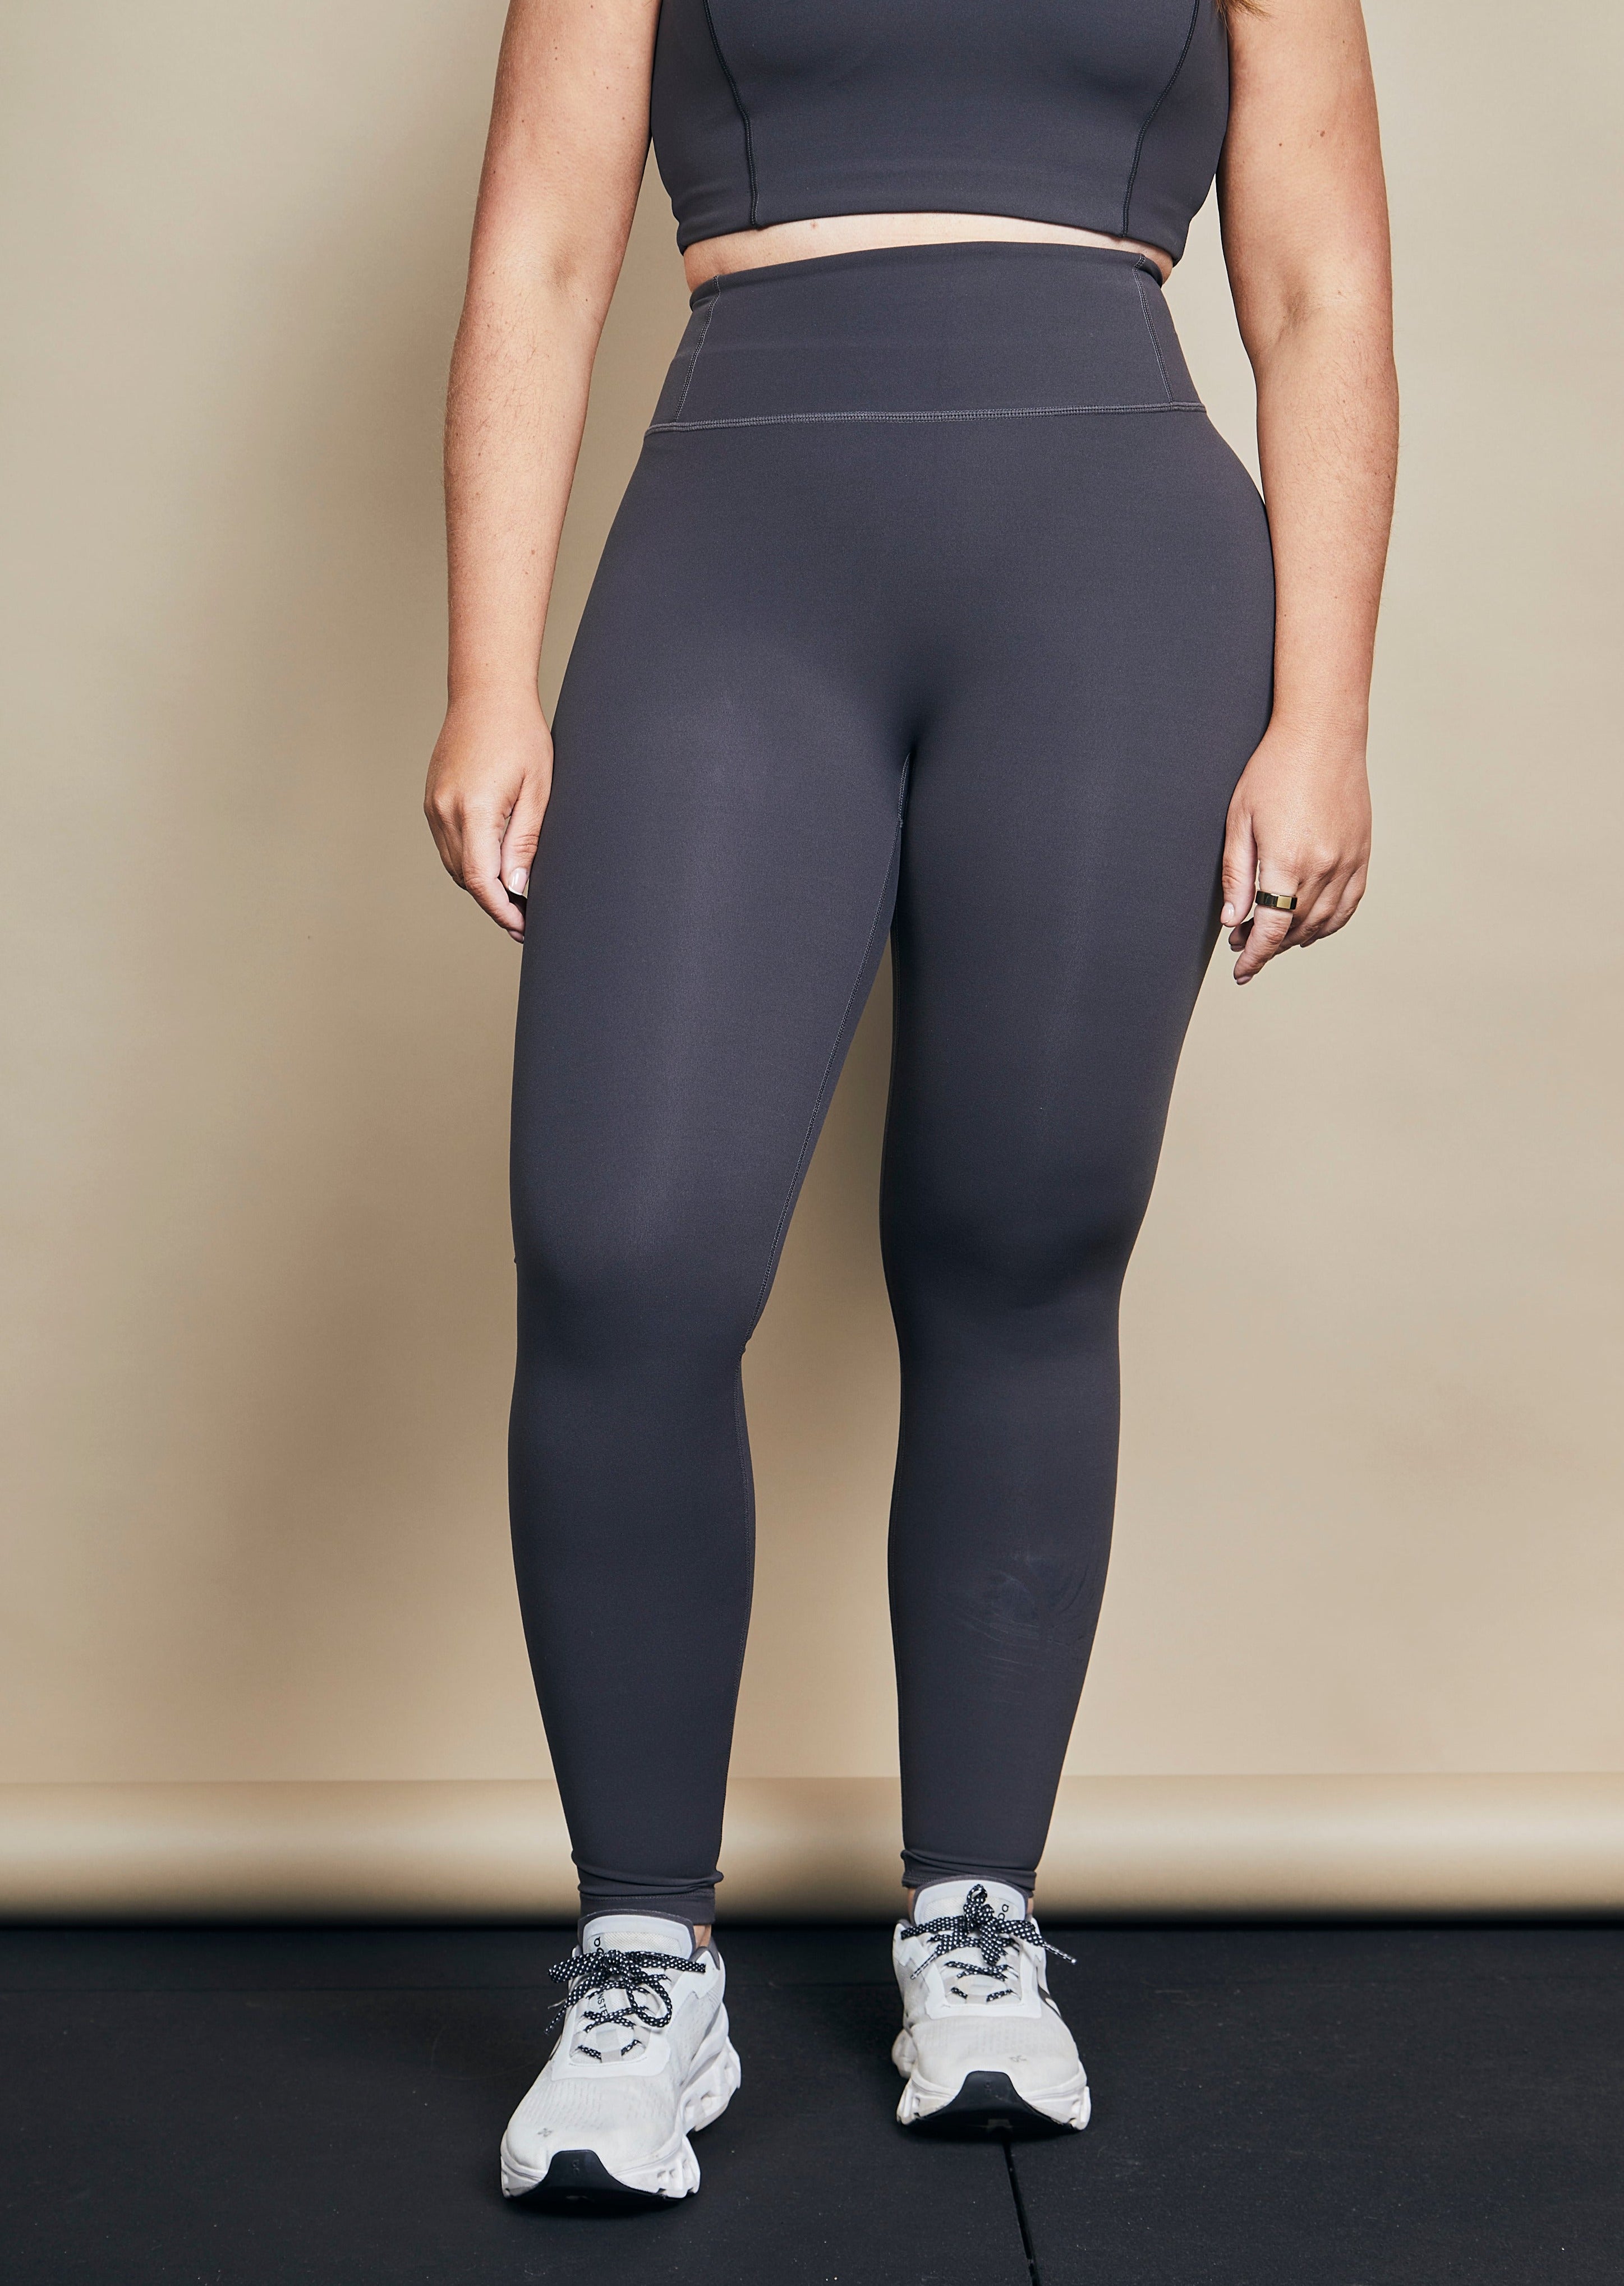 Women's High Waisted Gym Leggings – J.LUXE.FIT